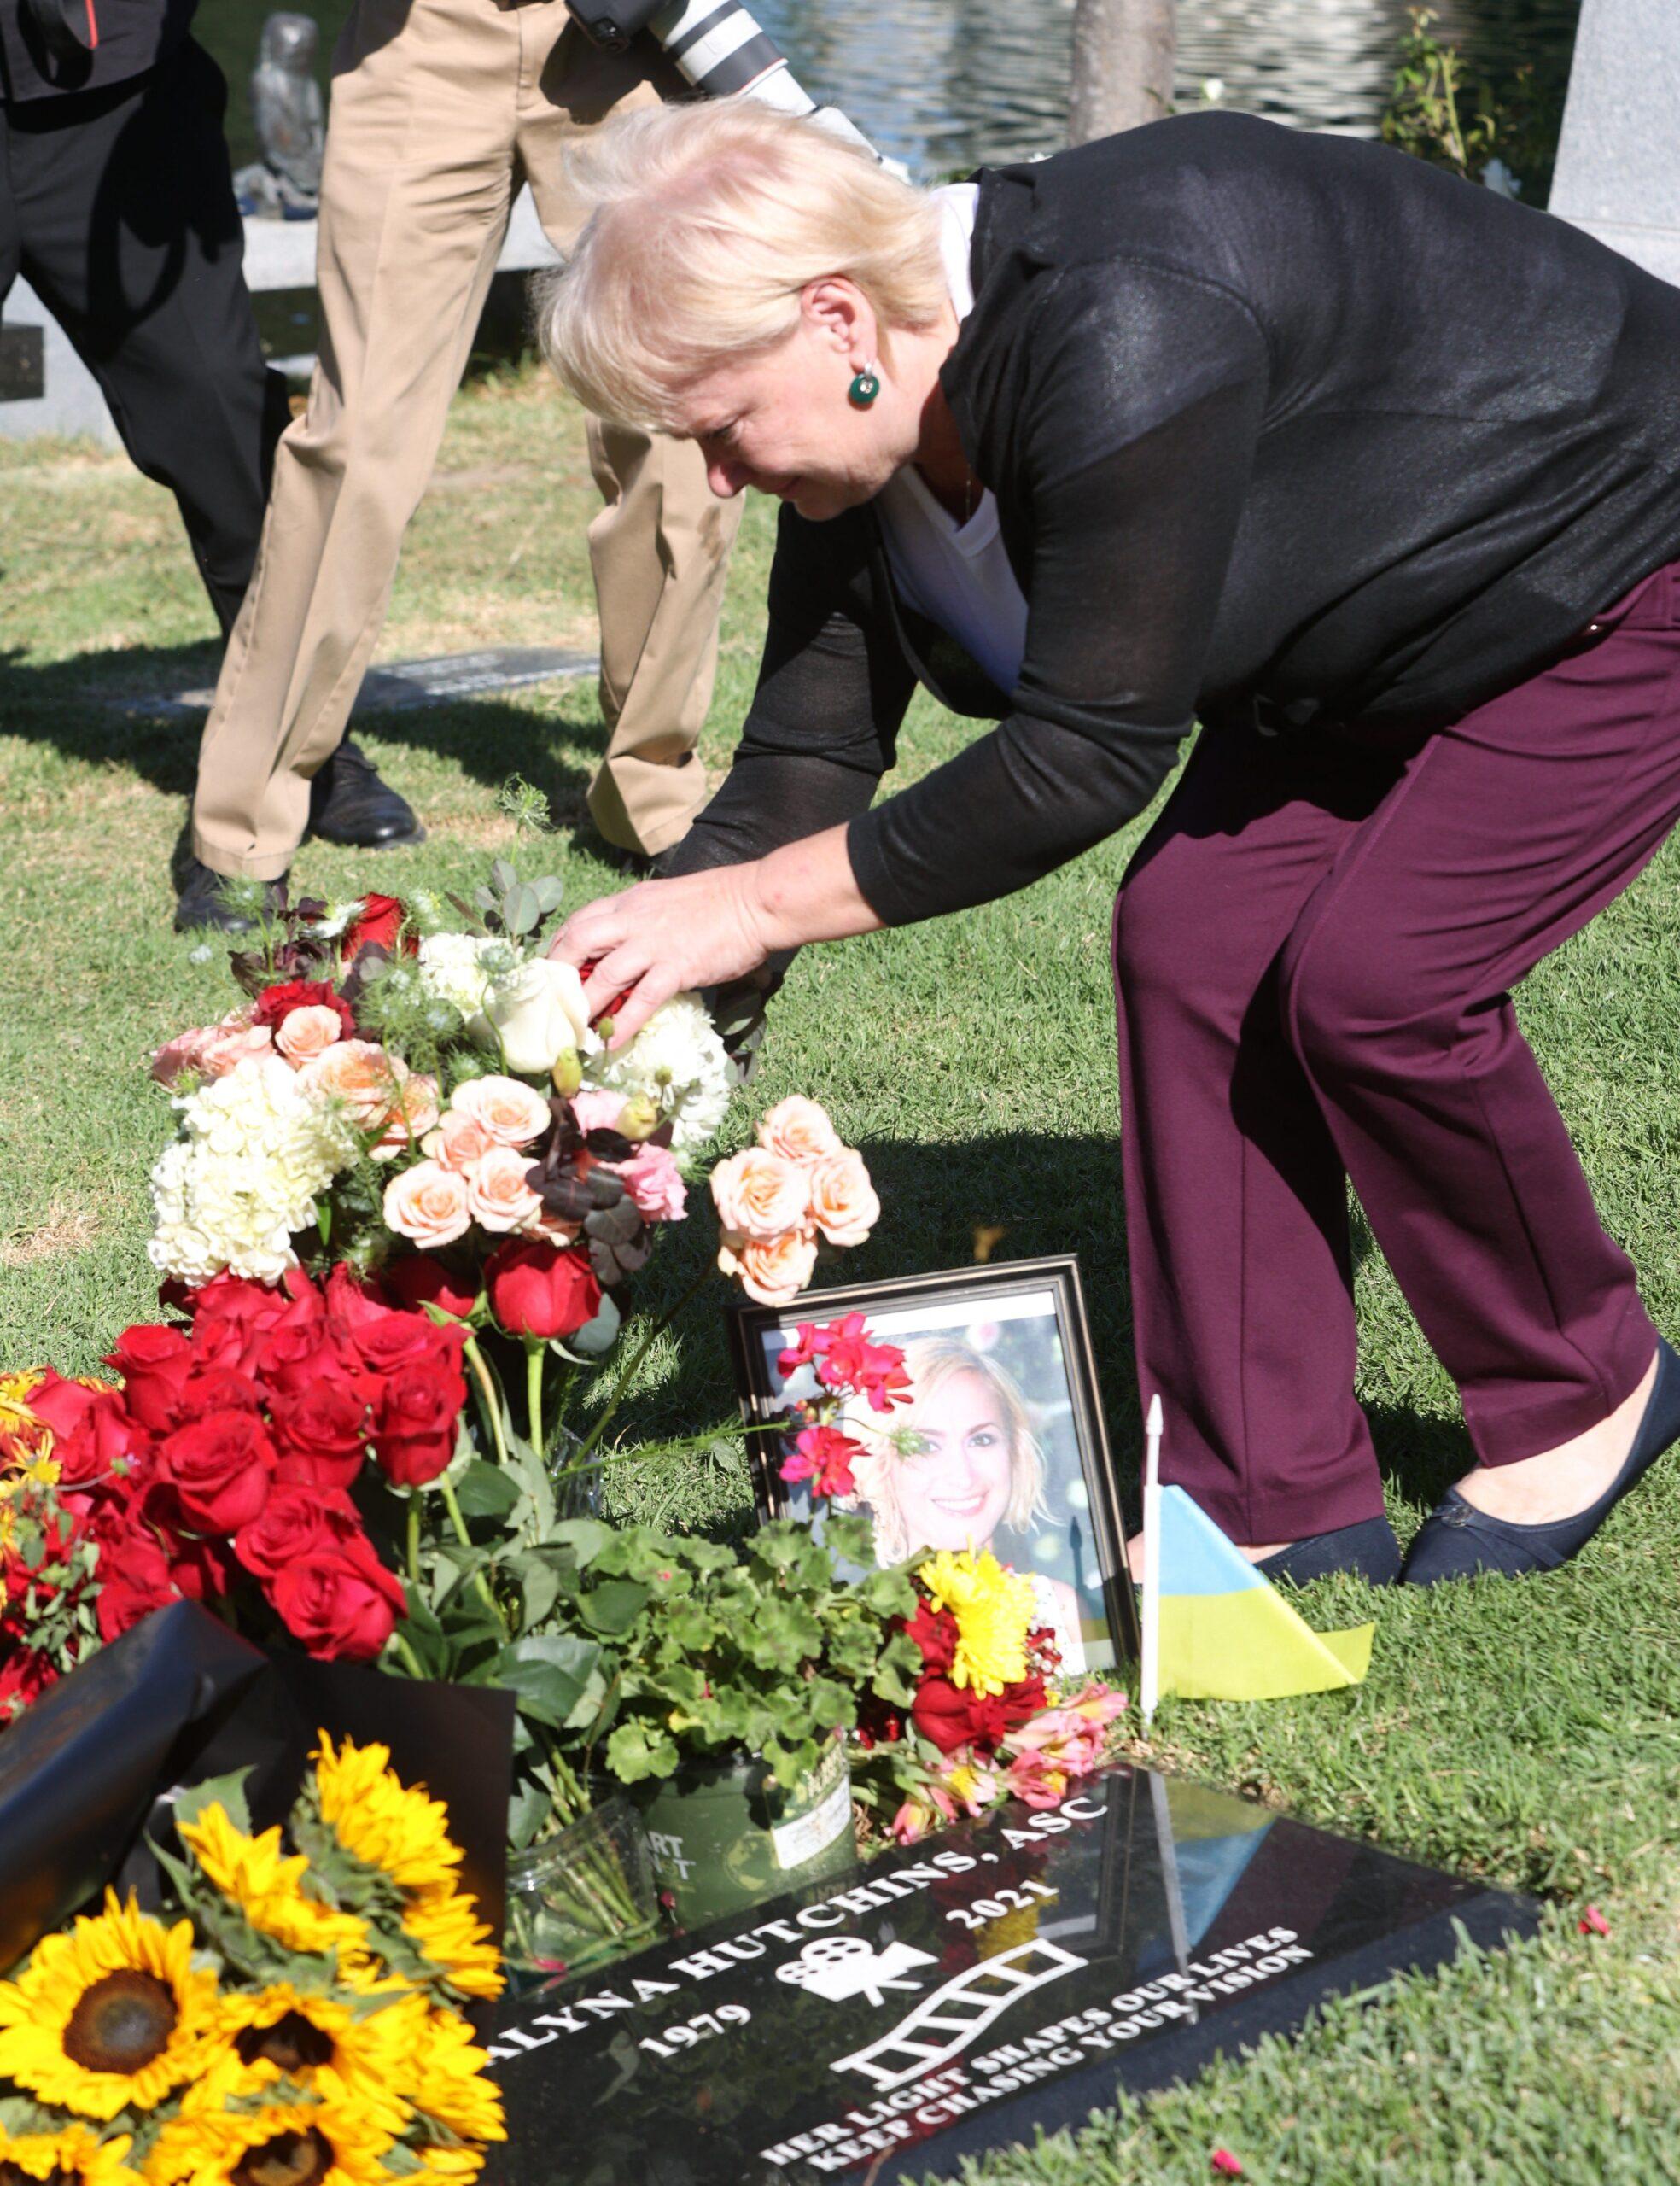 Rust movie shooting victim Halyna Hutchins mother, Olga traveled from Ukraine to Hollywood to lay flowers on her daughter’s grave on the 2nd anniversary of her death